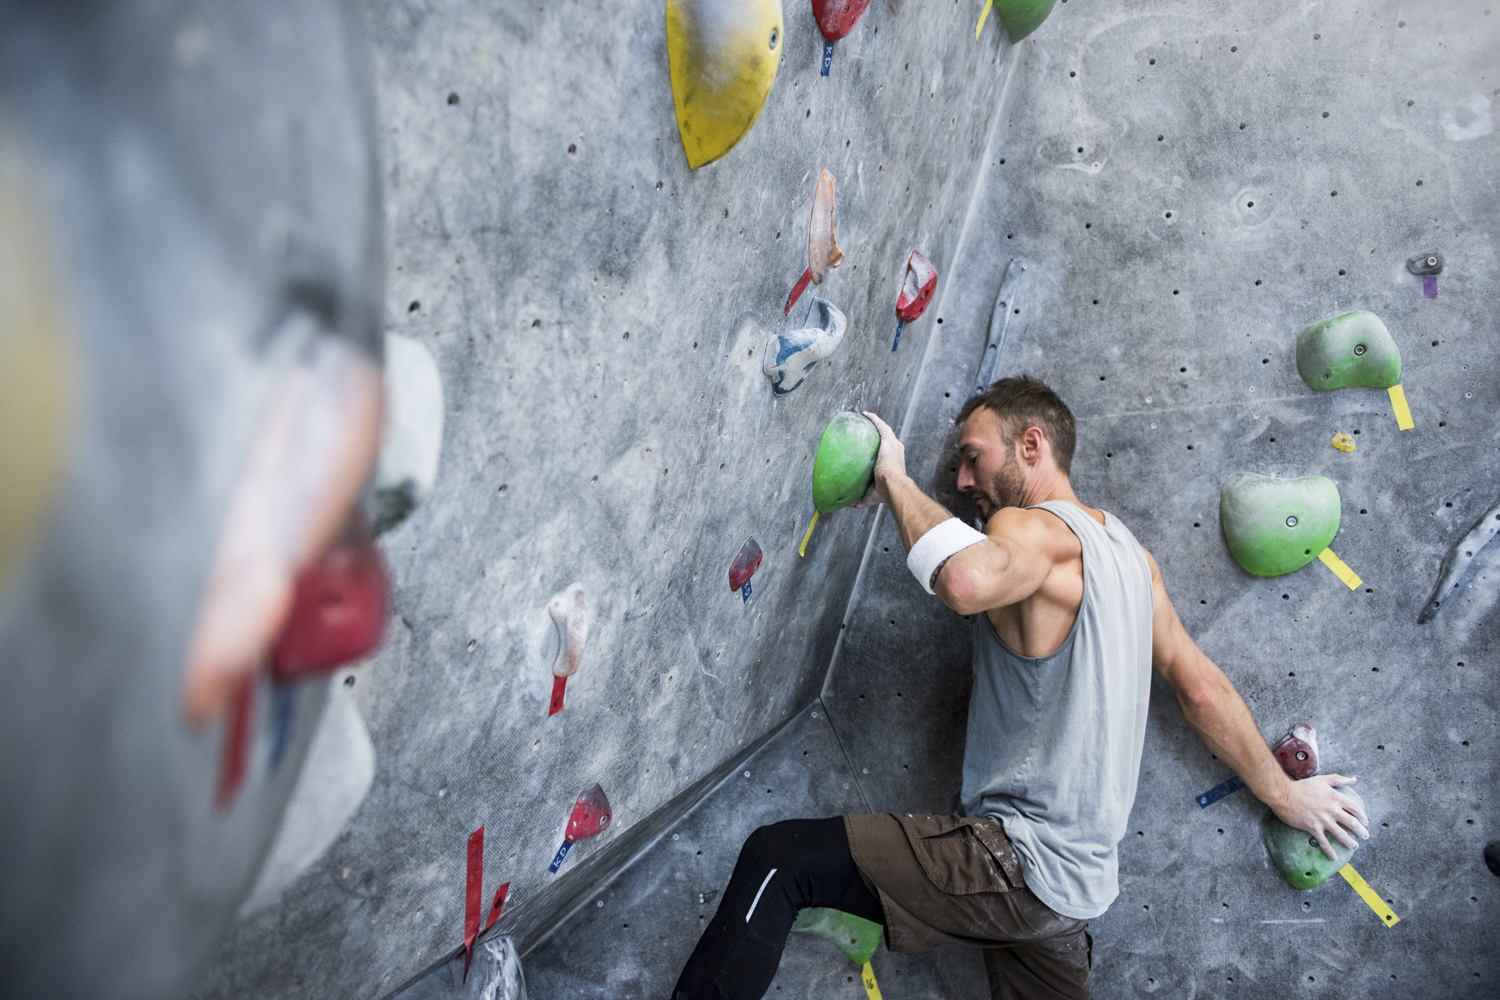 Bouldering: A beginner's guide to this full-body workout - The Manual